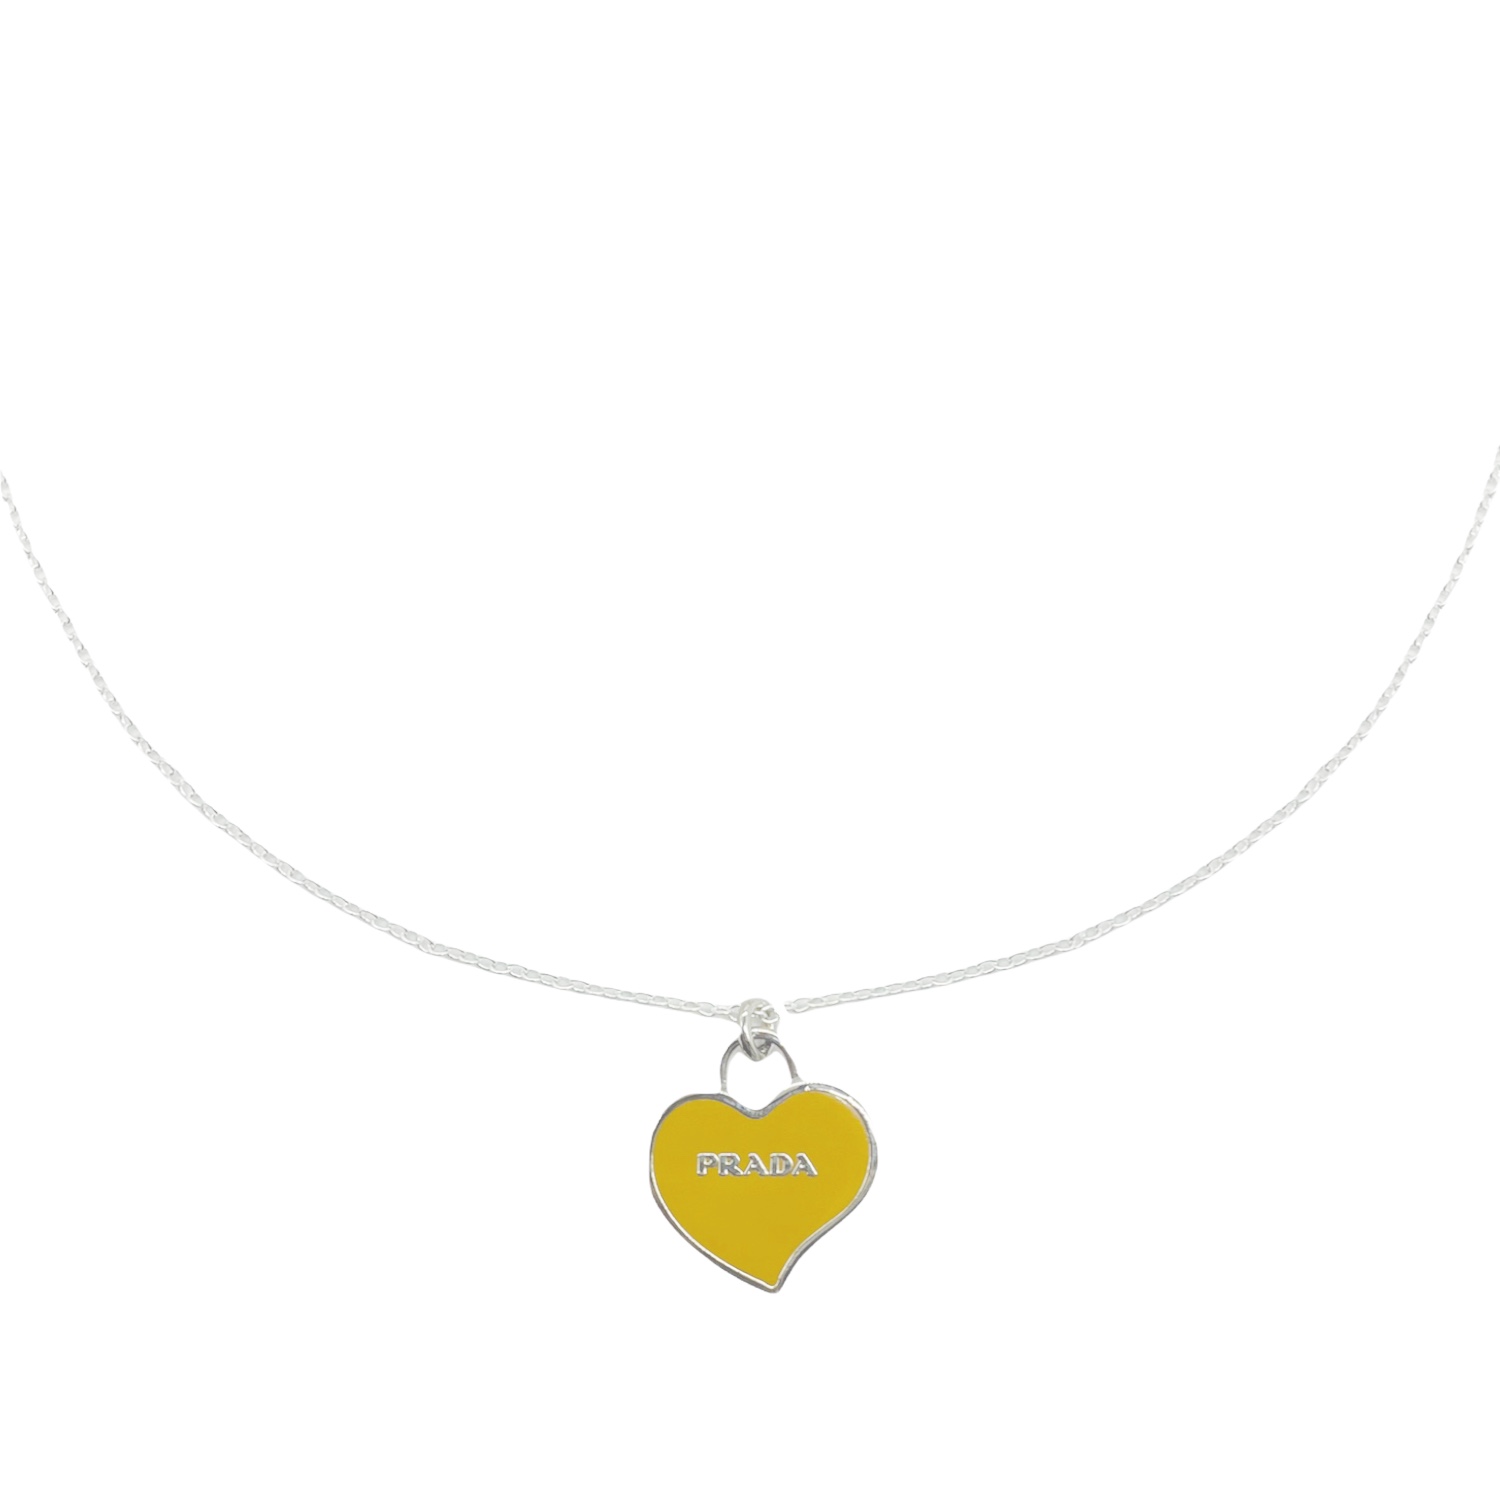 Reworked Prada Heart Pendant Necklace in Yellow and Silver | NITRYL